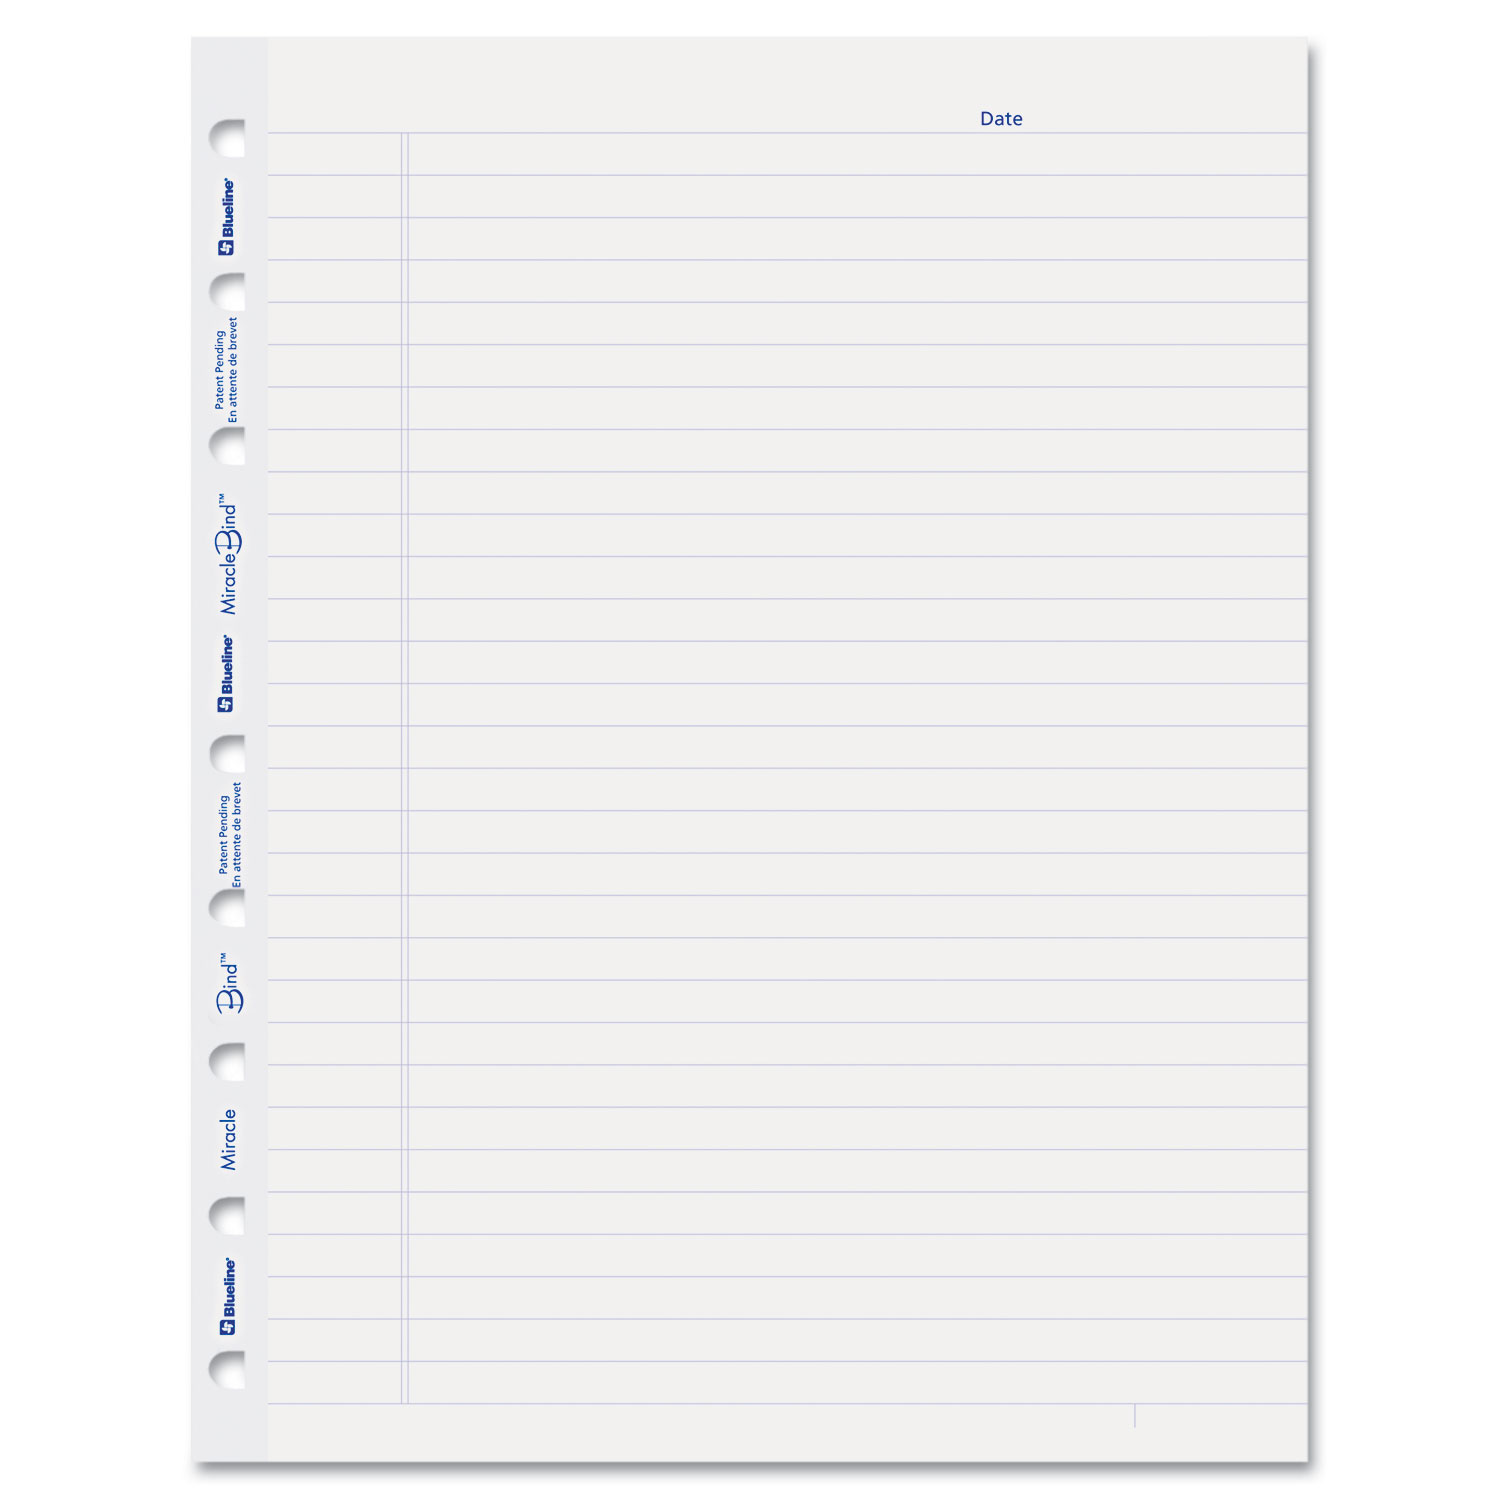 MiracleBind Ruled Paper Refill Sheets, 9-1/4 x 7-1/4, White, 50 Sheets/Pack